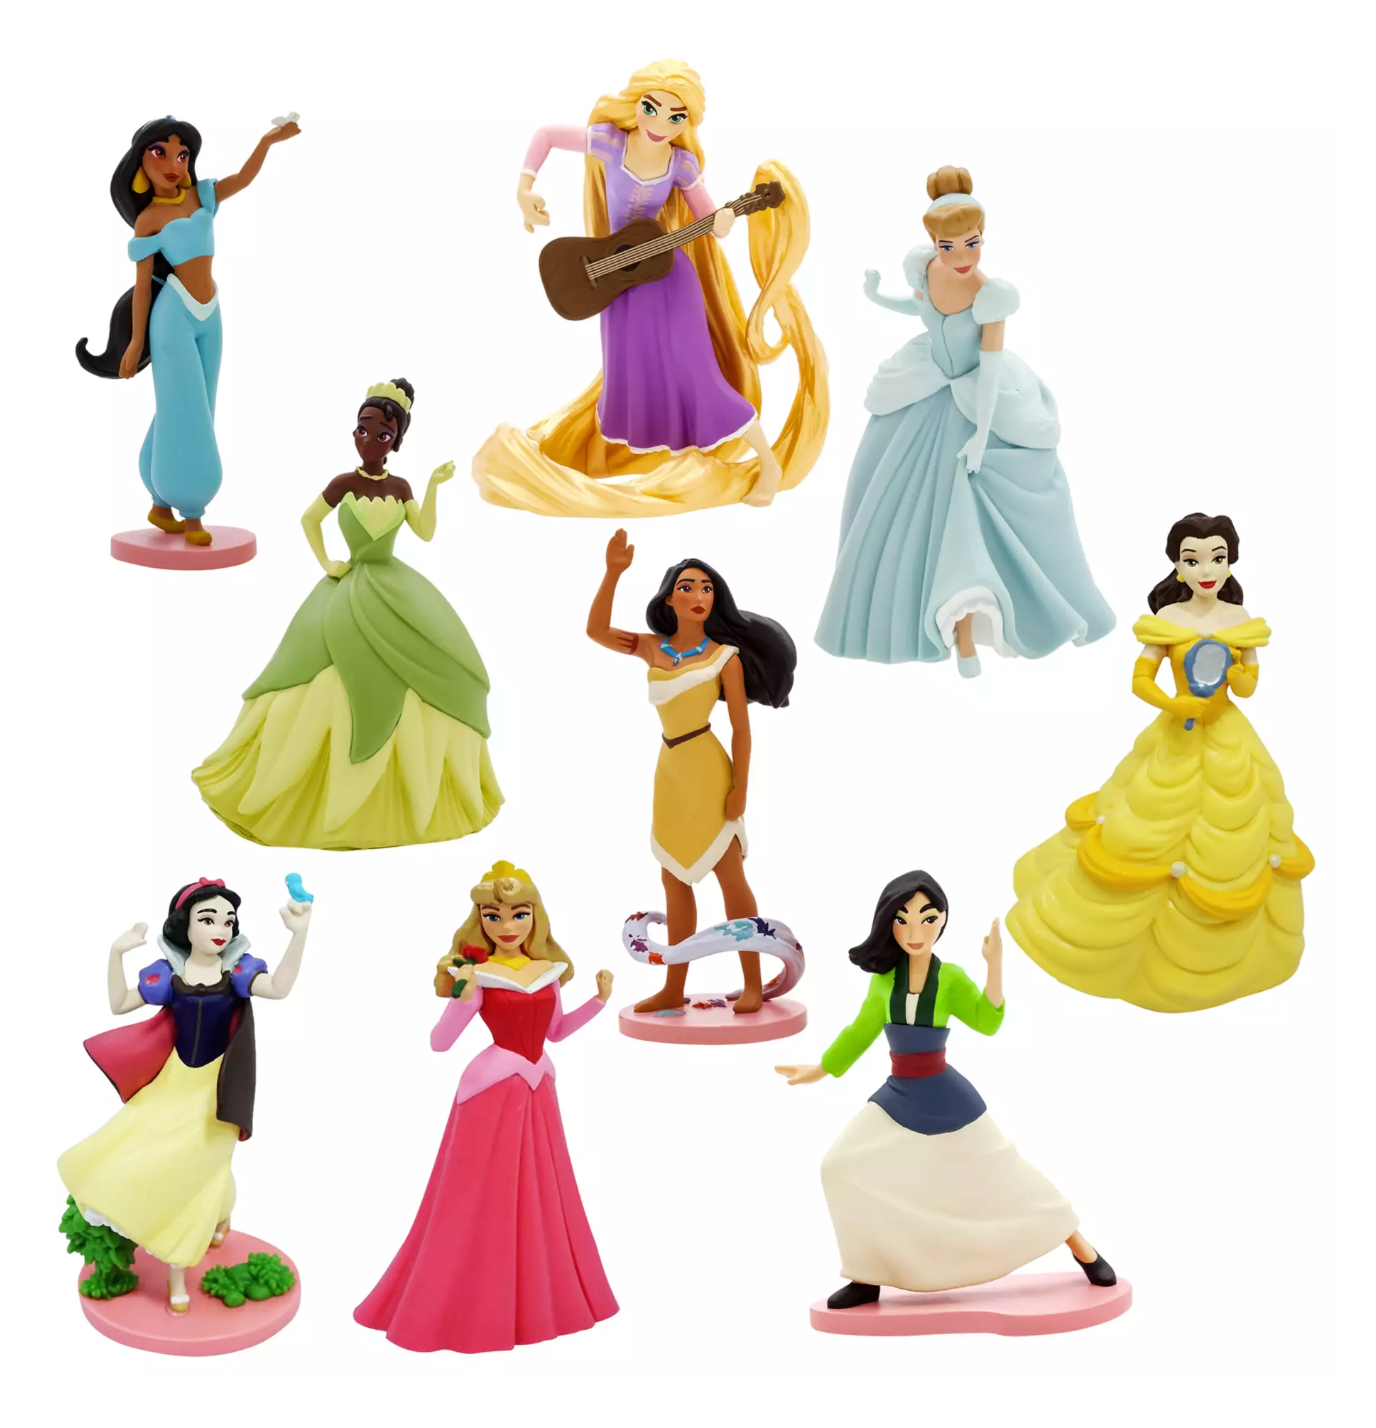 Disney Princess Deluxe Figure Playset 9pcs New with Box